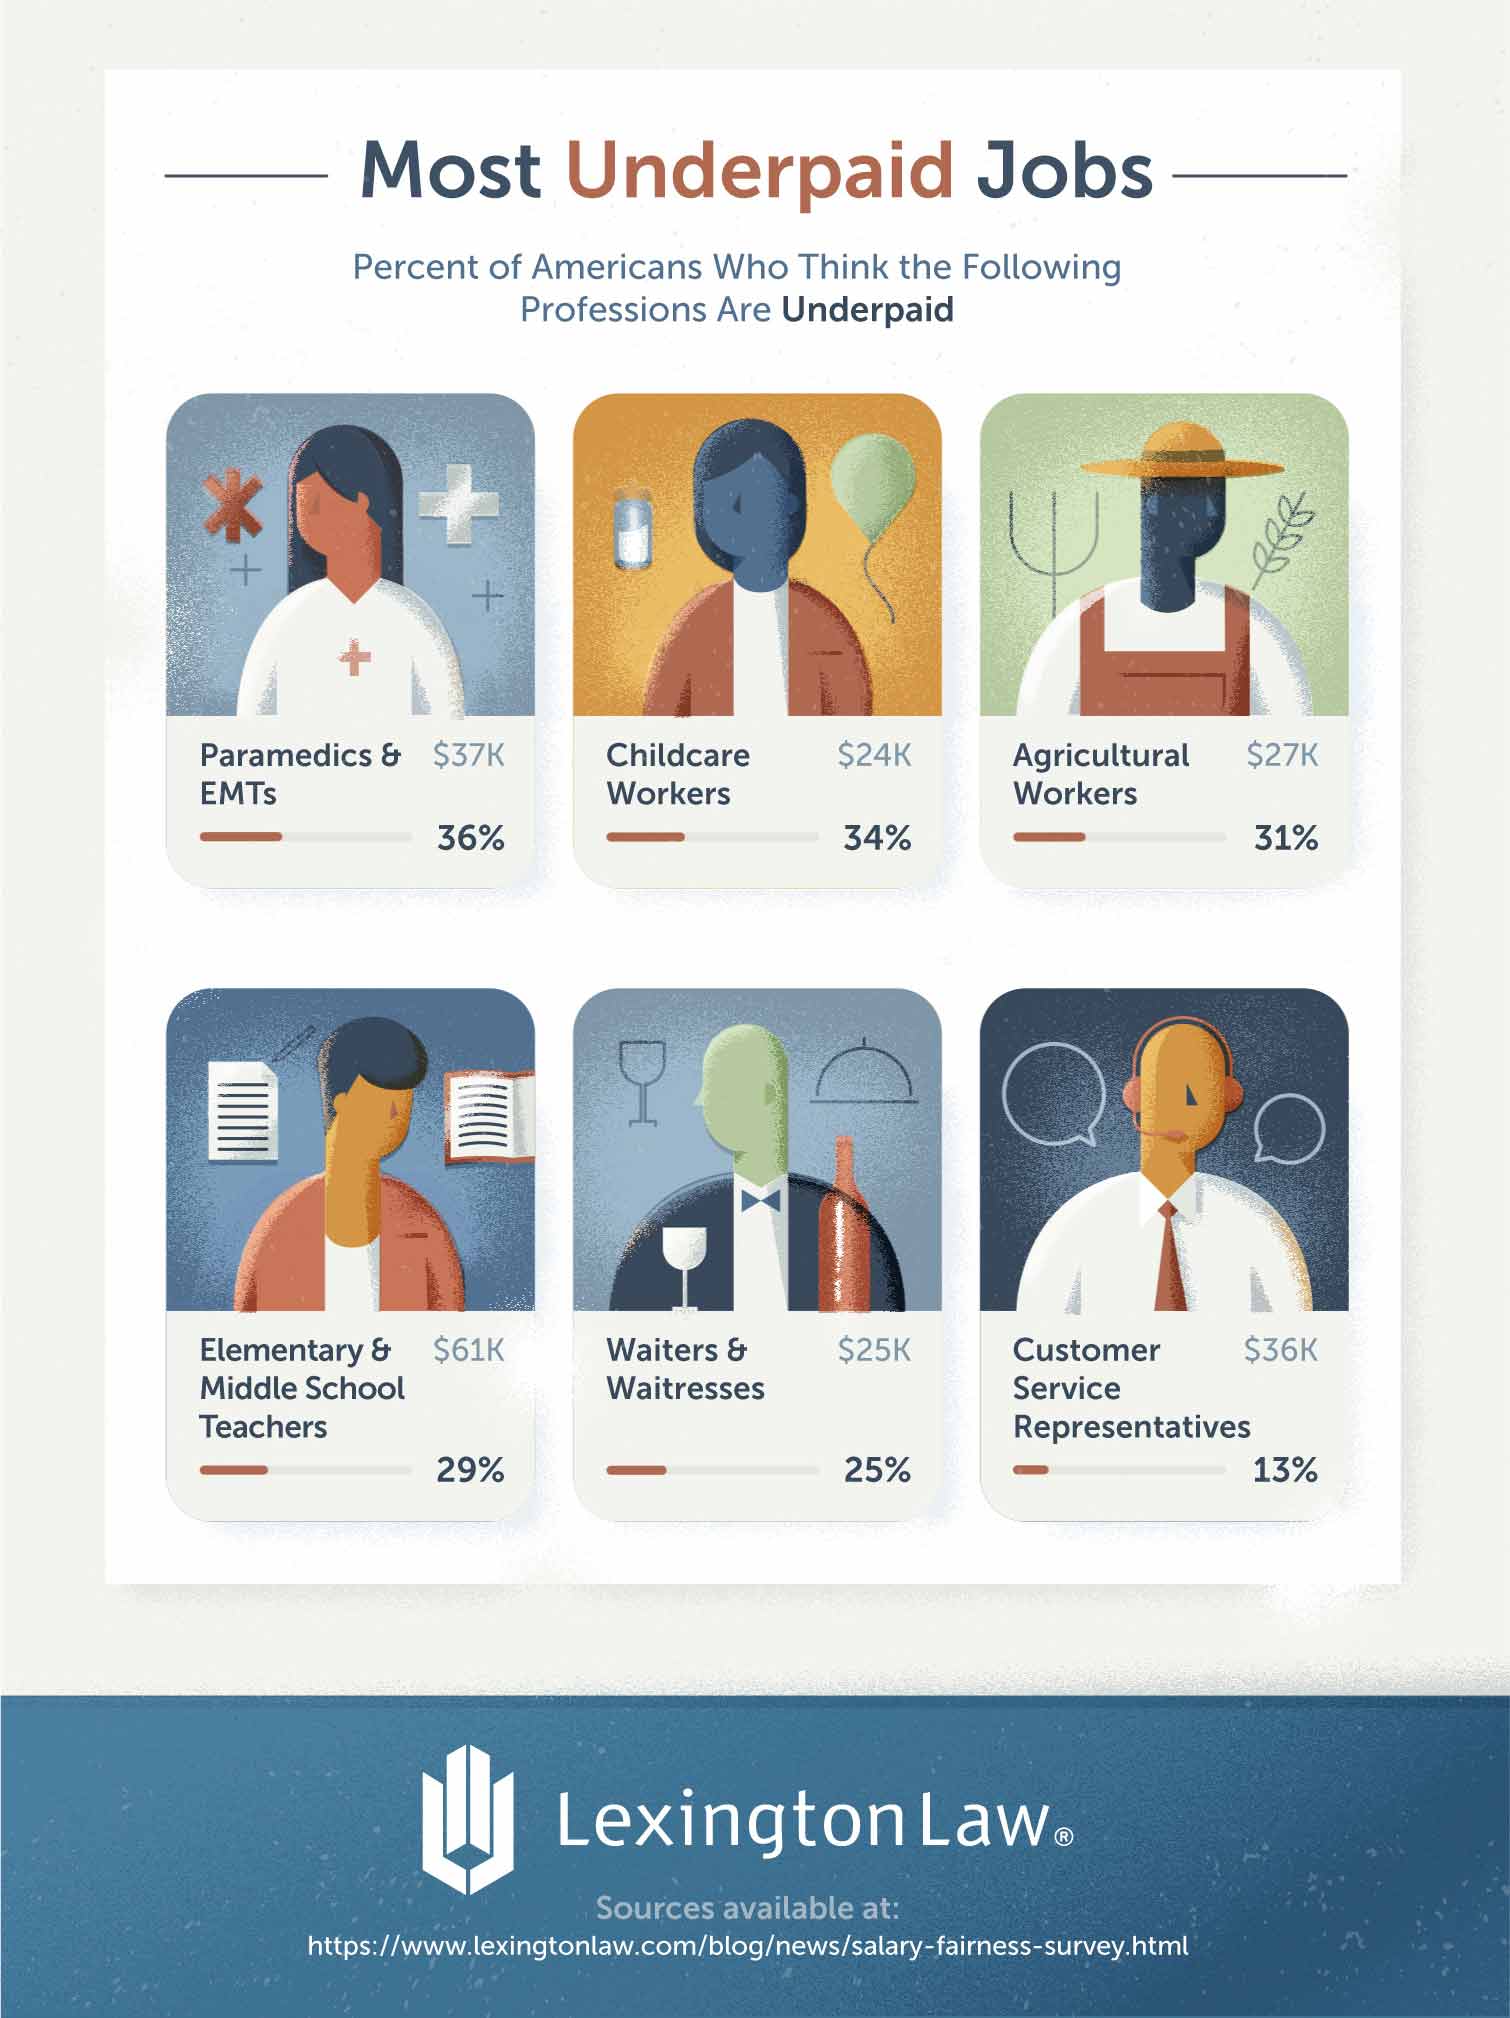 Infographic that illustrates which jobs Americans think are overpaid and underpaid 